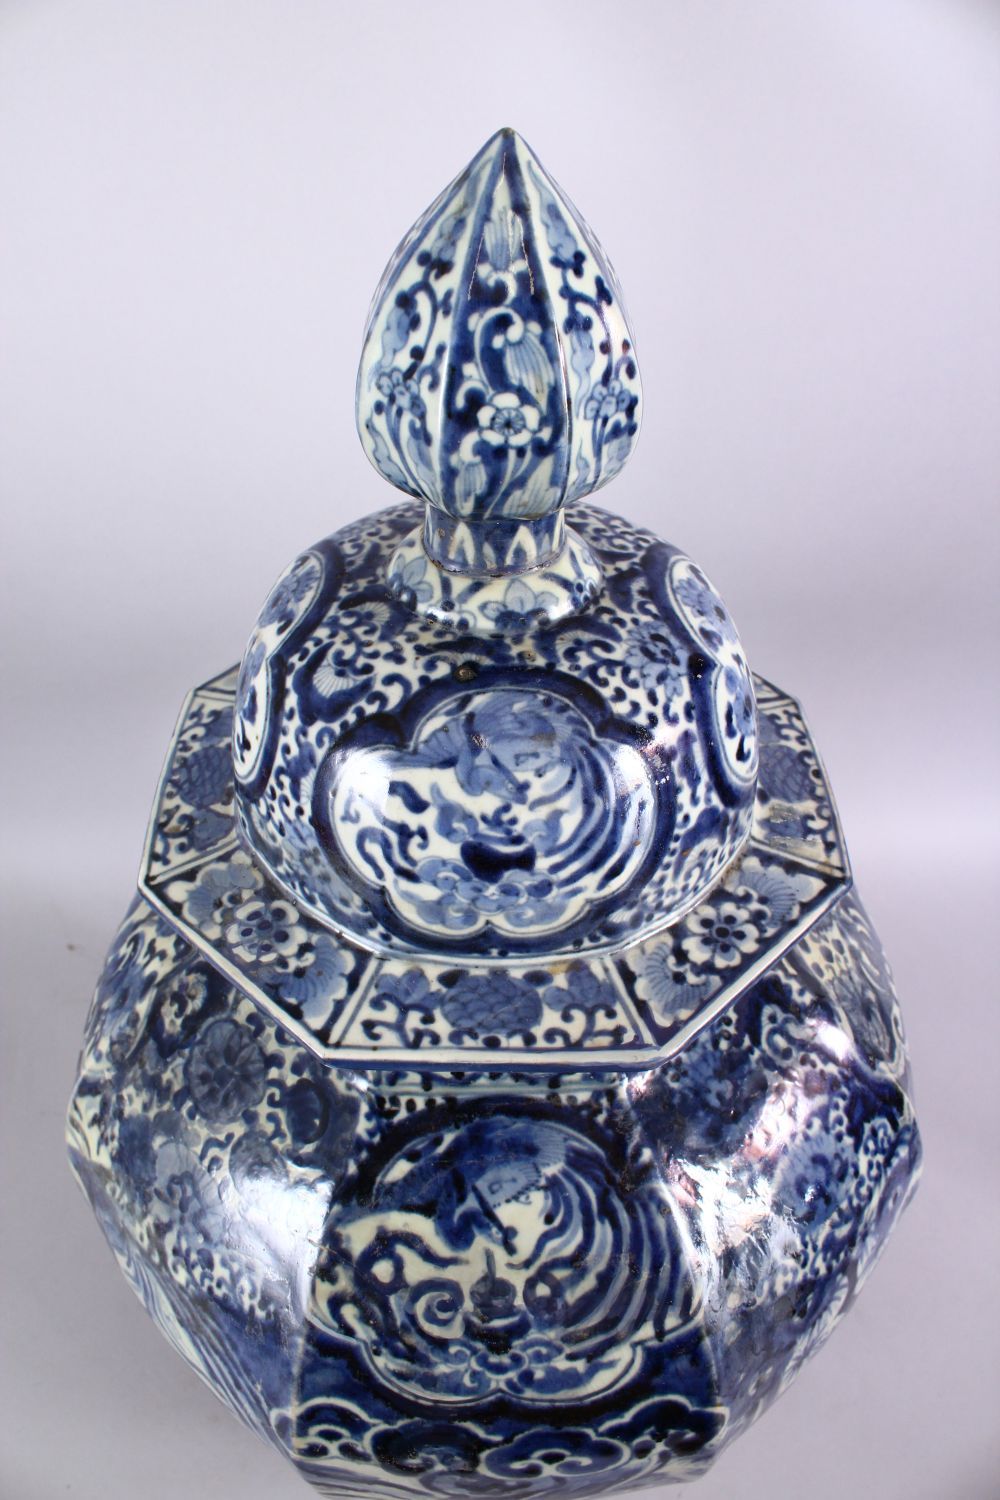 A LARGE EARLY 16TH / 17TH CENTURY JAPANESE BLUE & WHITIE IMARI PORCELAIN VASE & COVER, The octagonal - Image 5 of 6